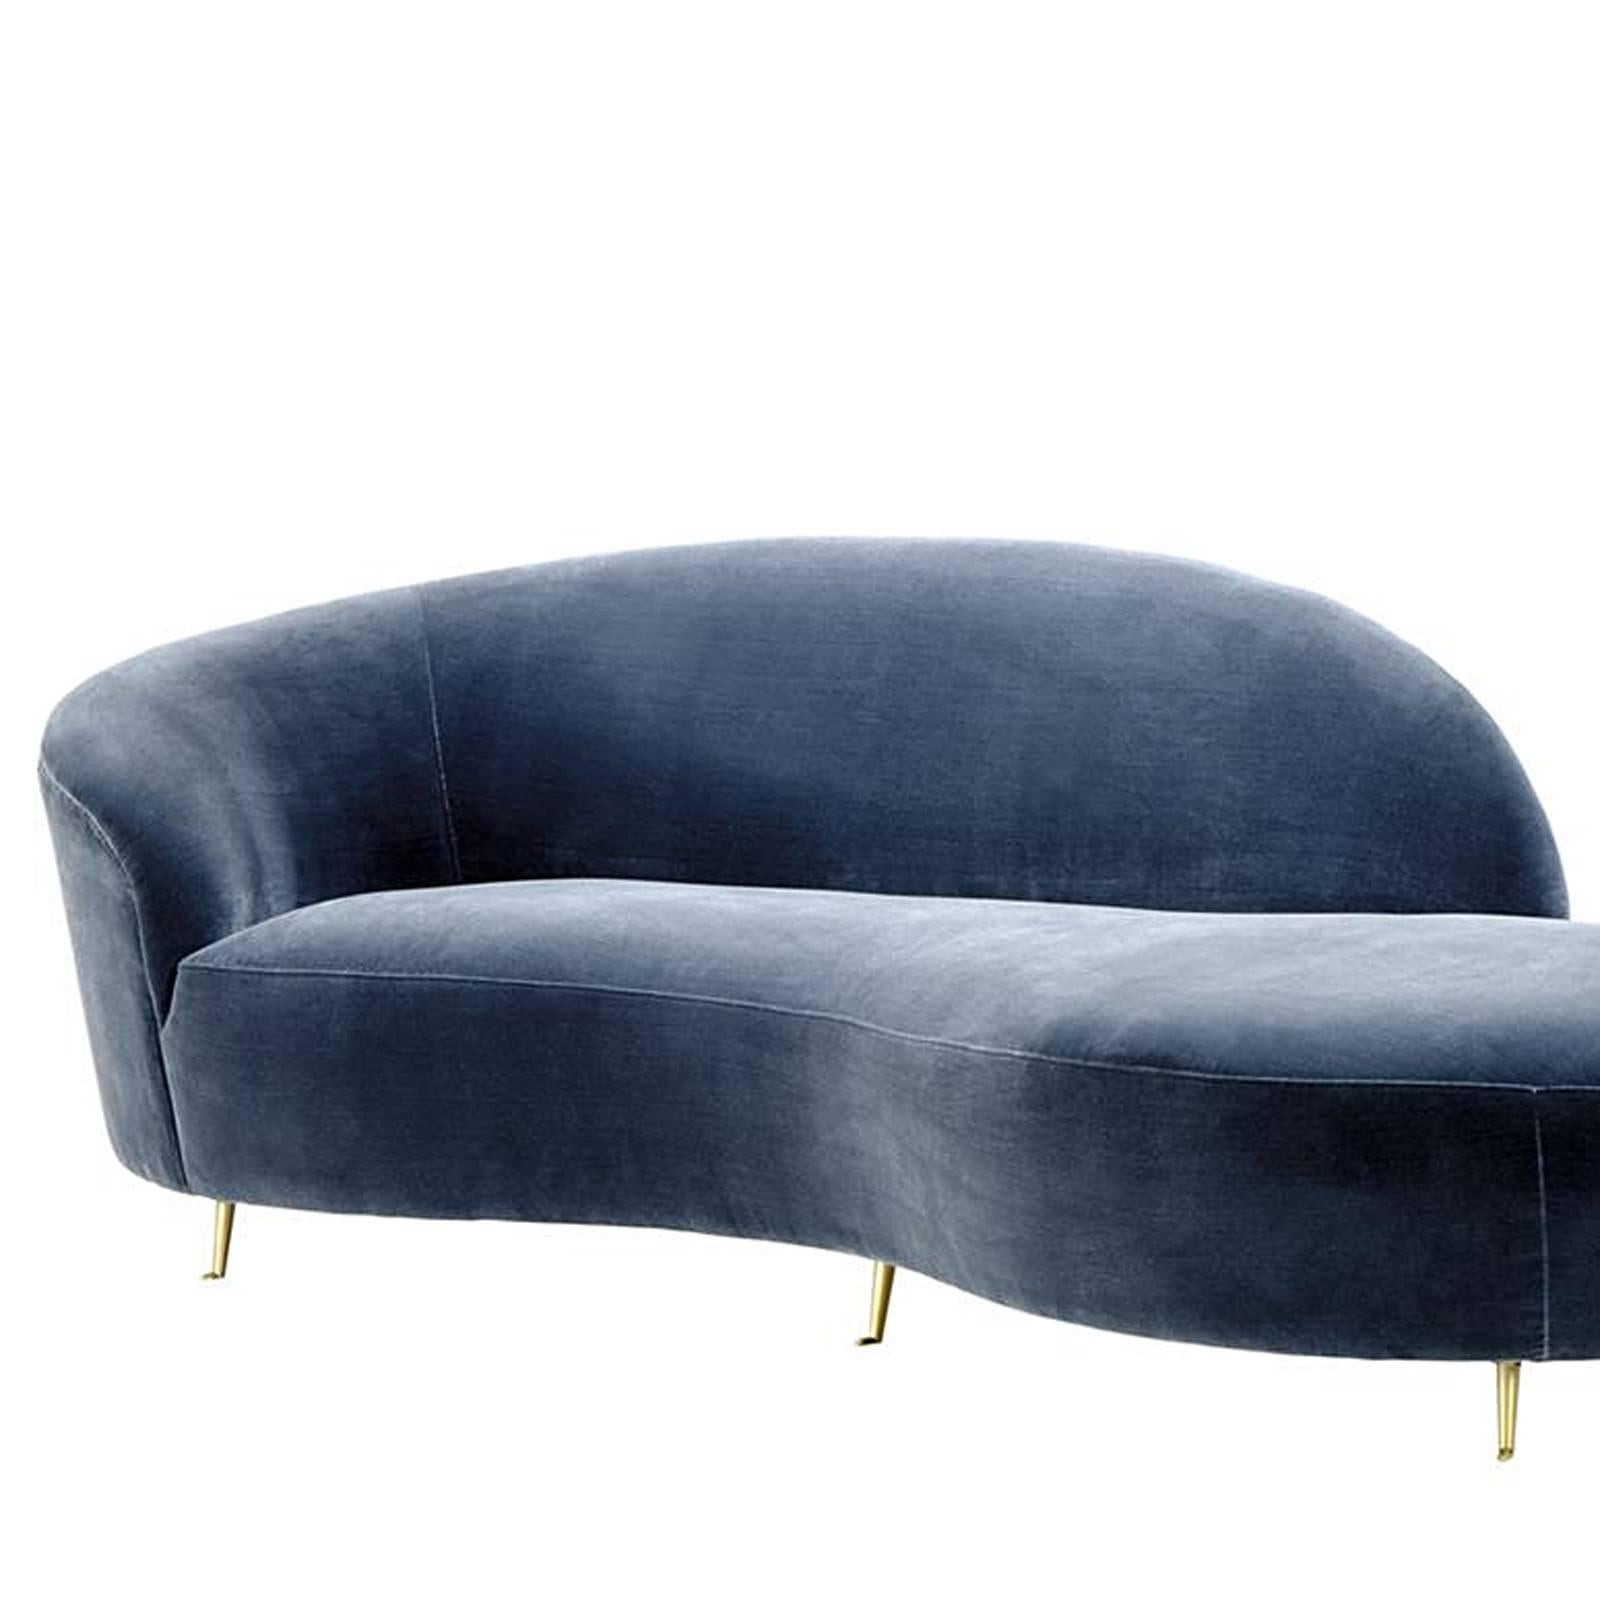 Sofa lounge faded blue upholstered with 
velvet, structure in solid wood with brass legs.
Fire retardent treated velvet.
